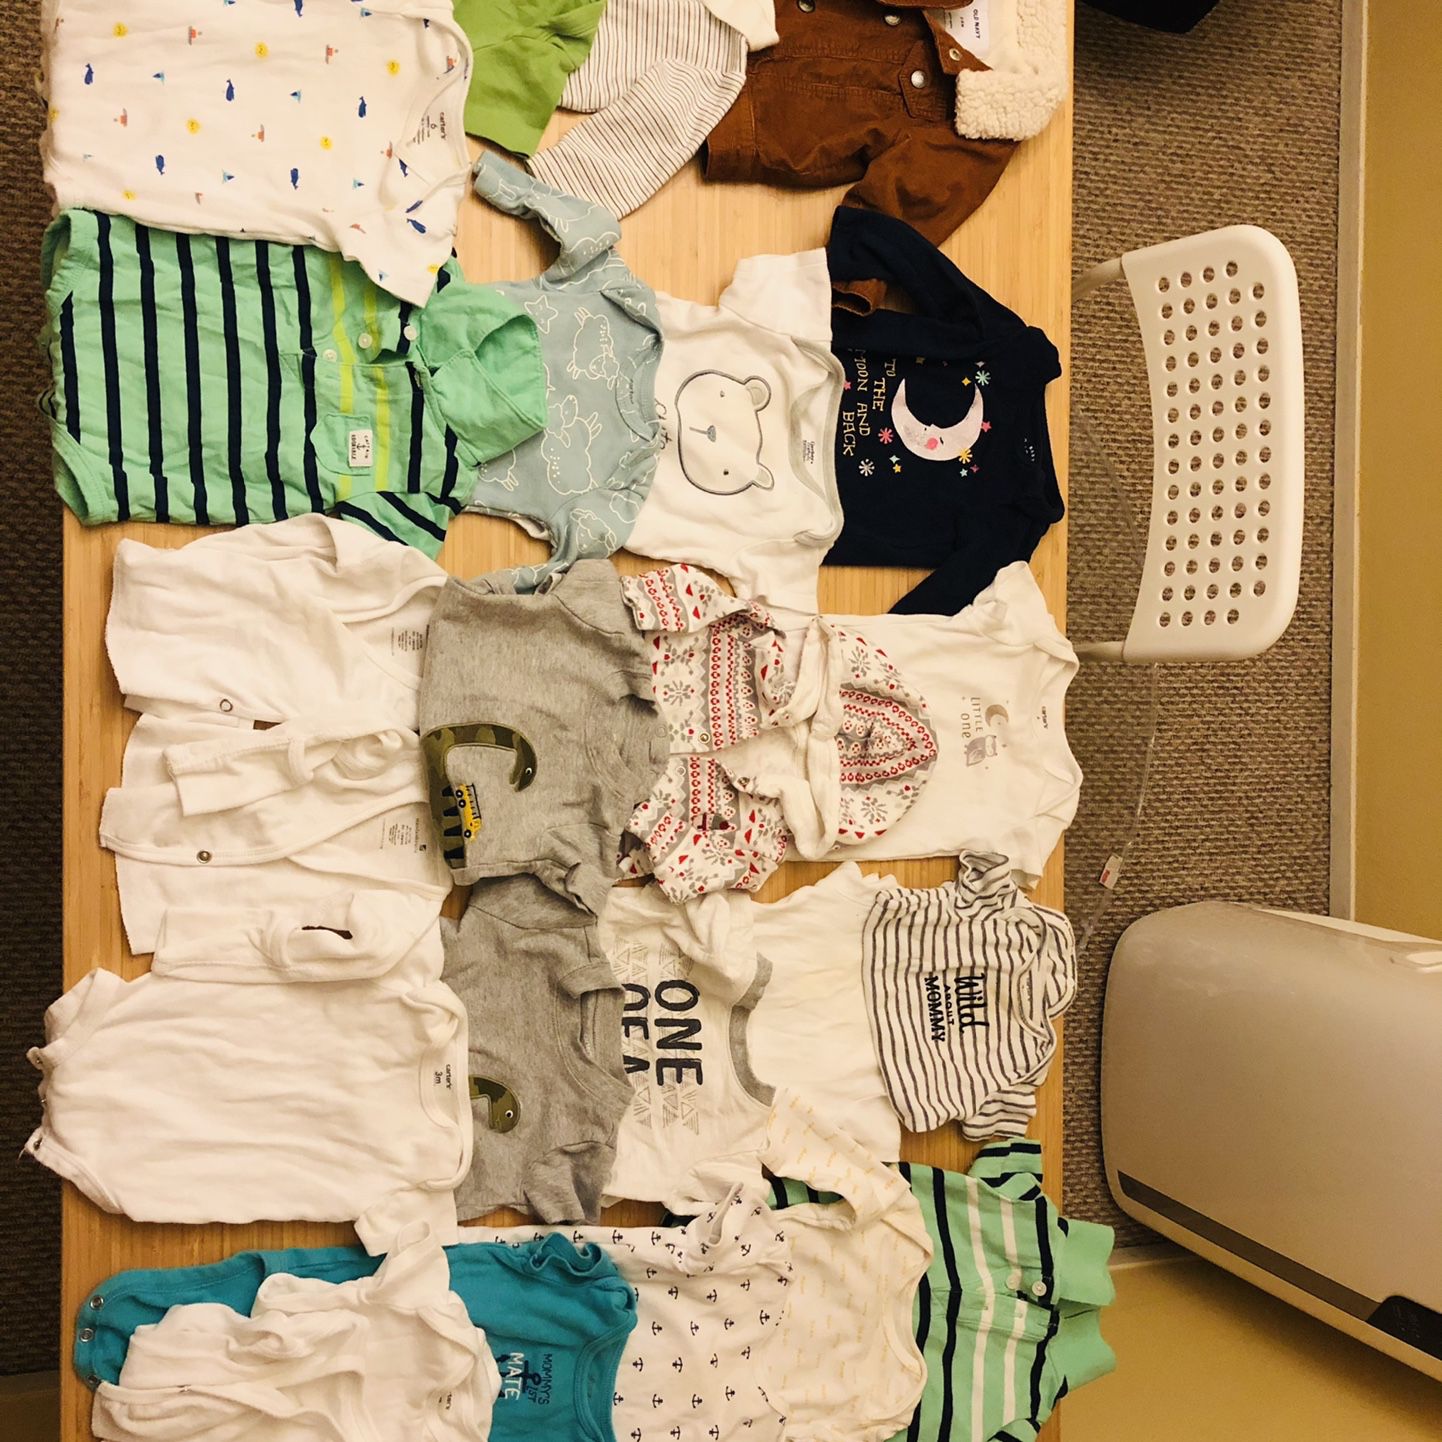 New Born To 6 Months Old Clothes